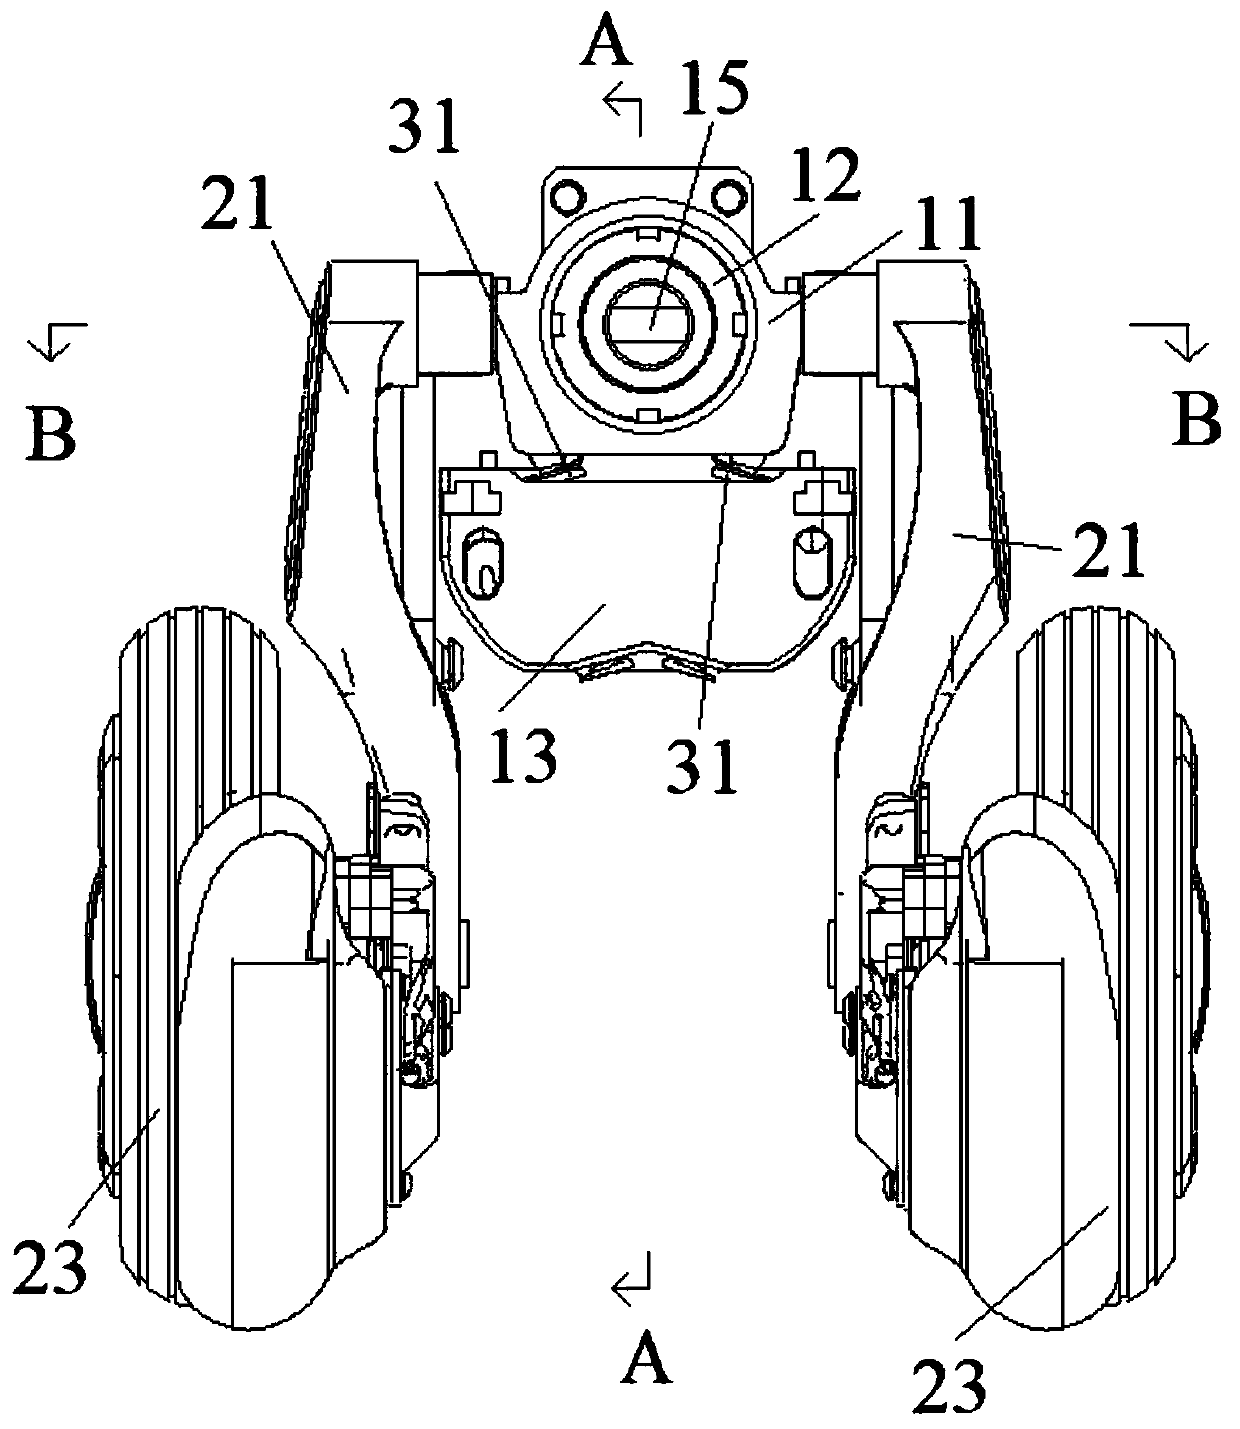 Scooter rocker arm reset structure and three-wheeled scooter